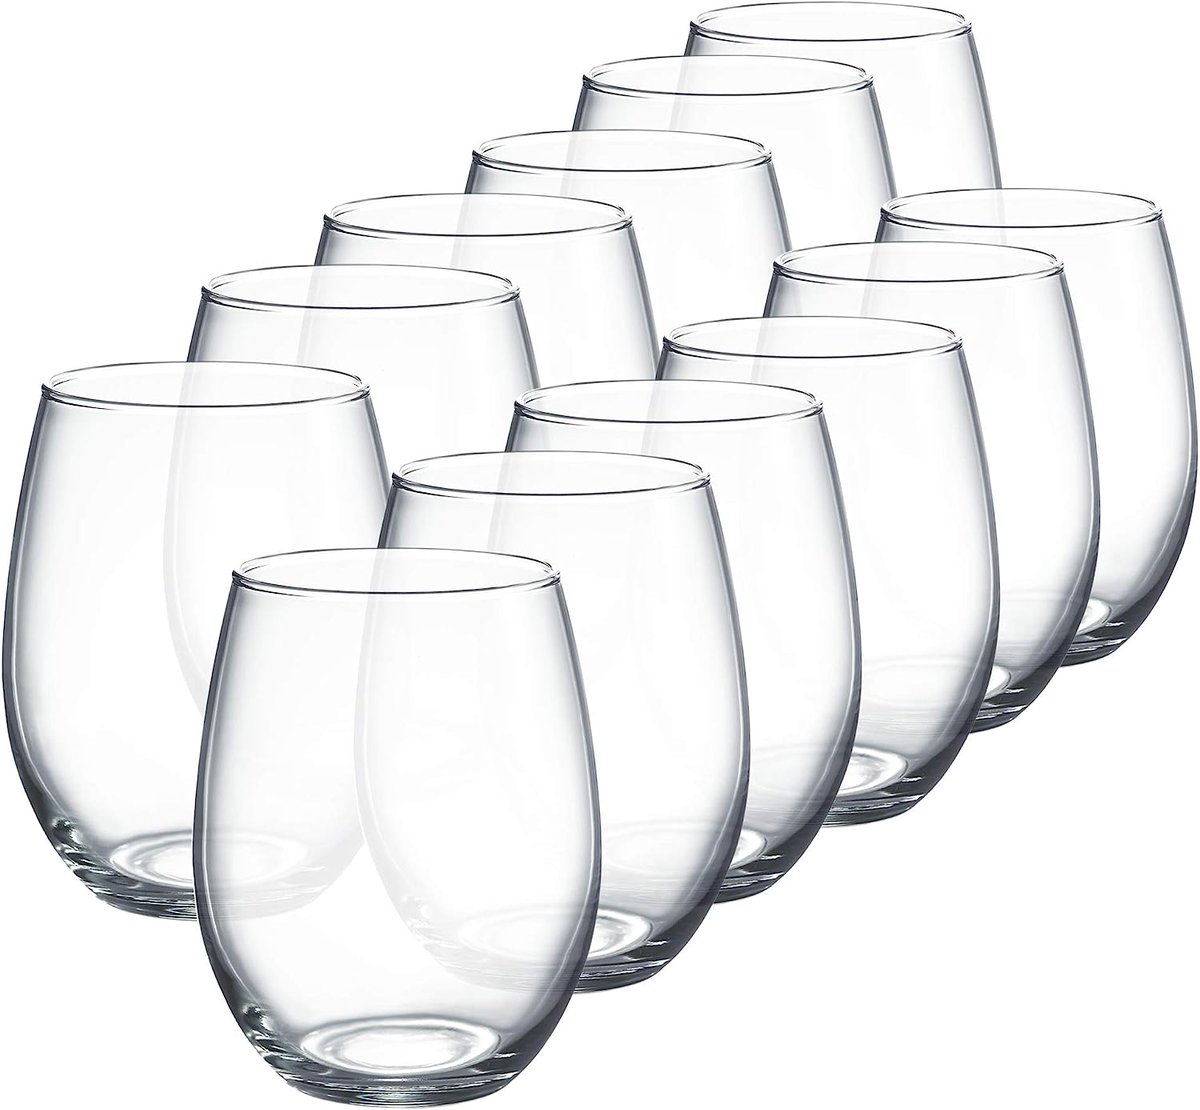 41% OFF | ONLY $15.98 | Price subject to change

Stemless Wine Glass (Set Of 12)

Link: brikkis.com/product/best-s…
#Ad #Brikkis #DealOfTheDay #40percentoff #stemlesswineglass #wineglasses #winetime